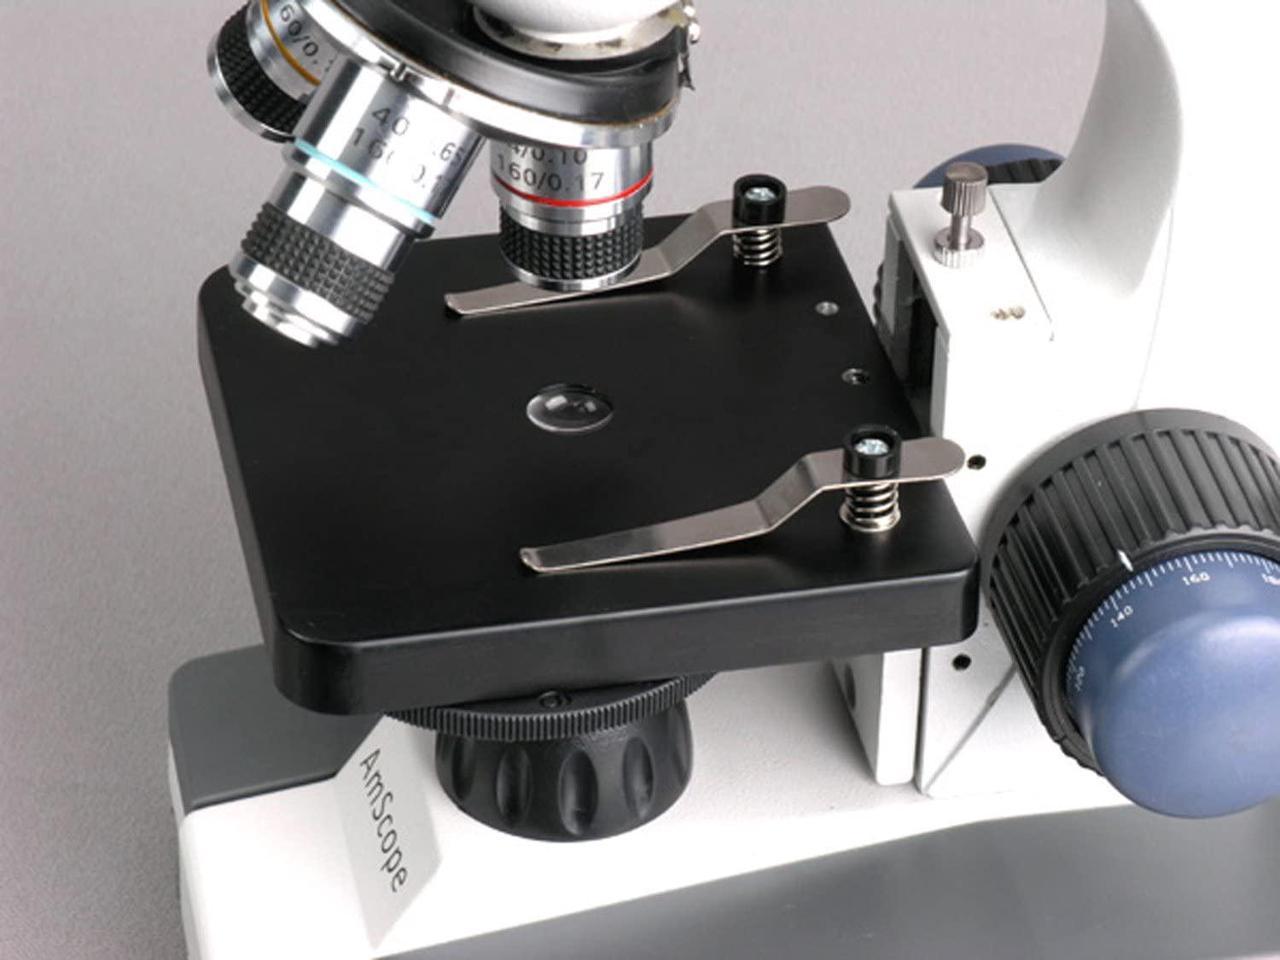 Single-Lens Condenser 110V WF10x and WF25x Eyepieces LED Illumination AmScope M150C-PS25 Compound Monocular Microscope Coaxial Coarse and Fine Focus Includes Set of 25 Prepared Slides 40x-1000x Magnification Plain Stage Brightfield 